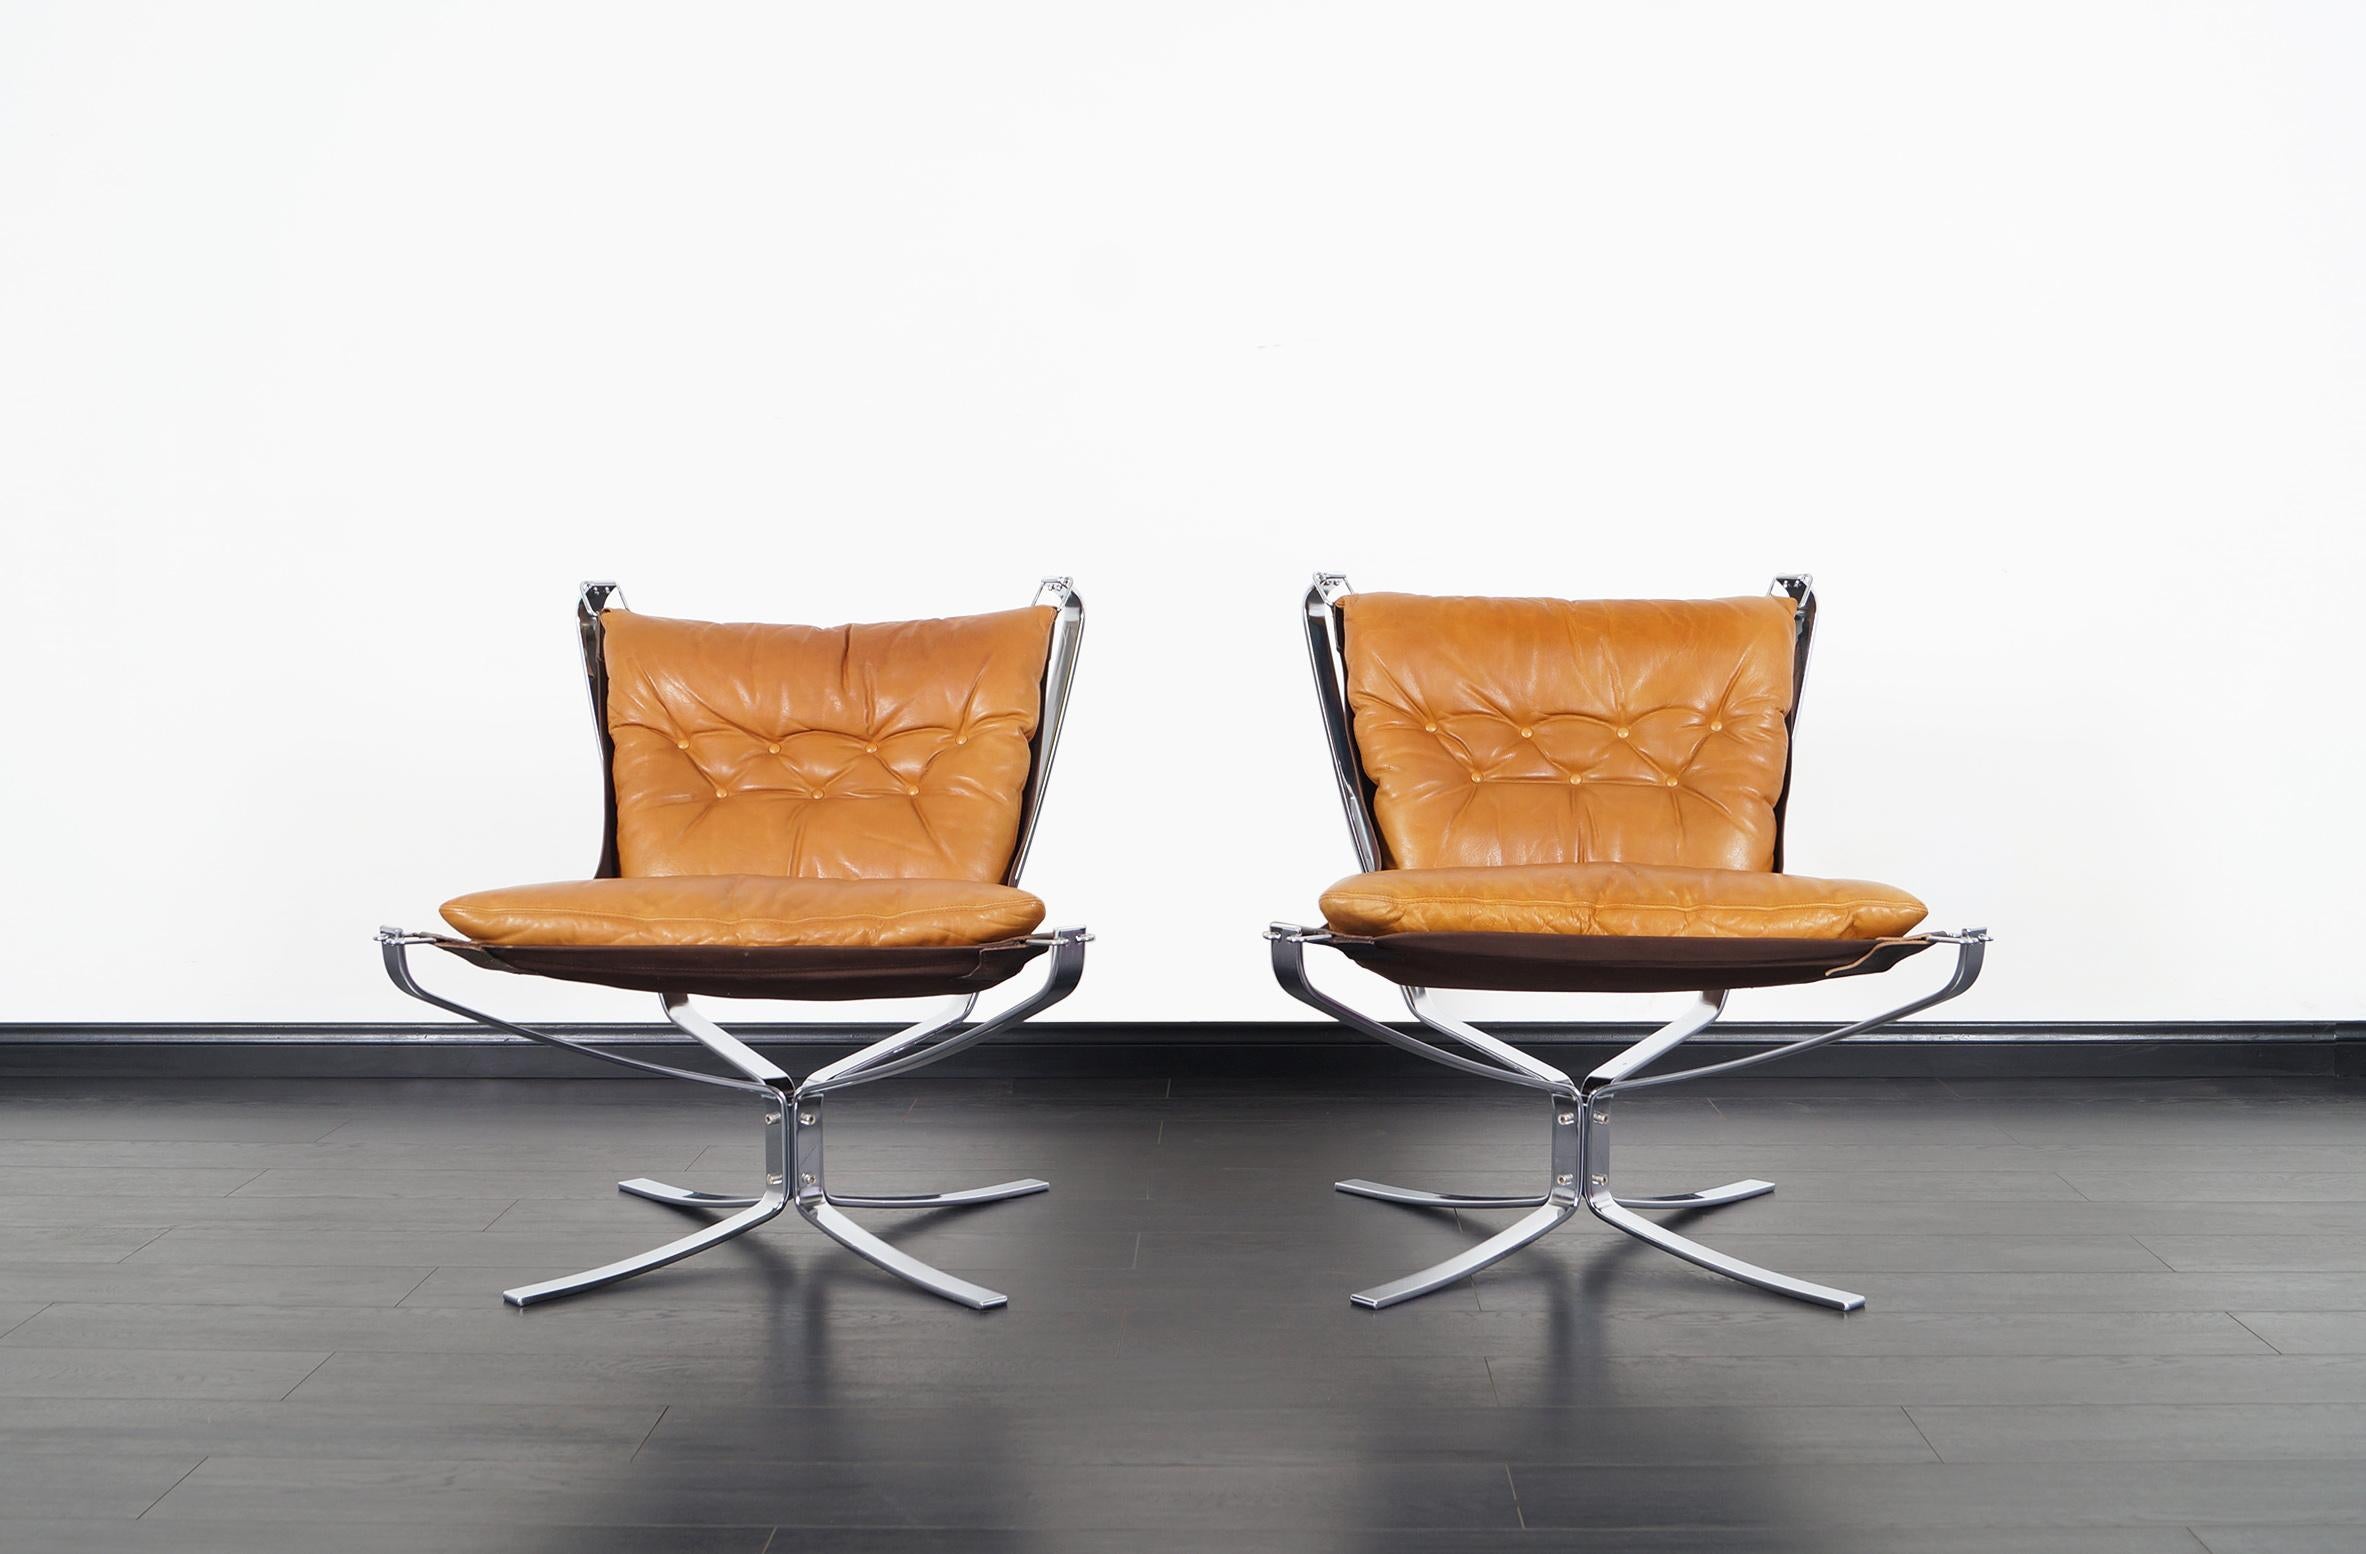 Stunning pair of vintage 'Falcon' lounge chairs designed by Sigurd Ressell for Vatne Møbler.